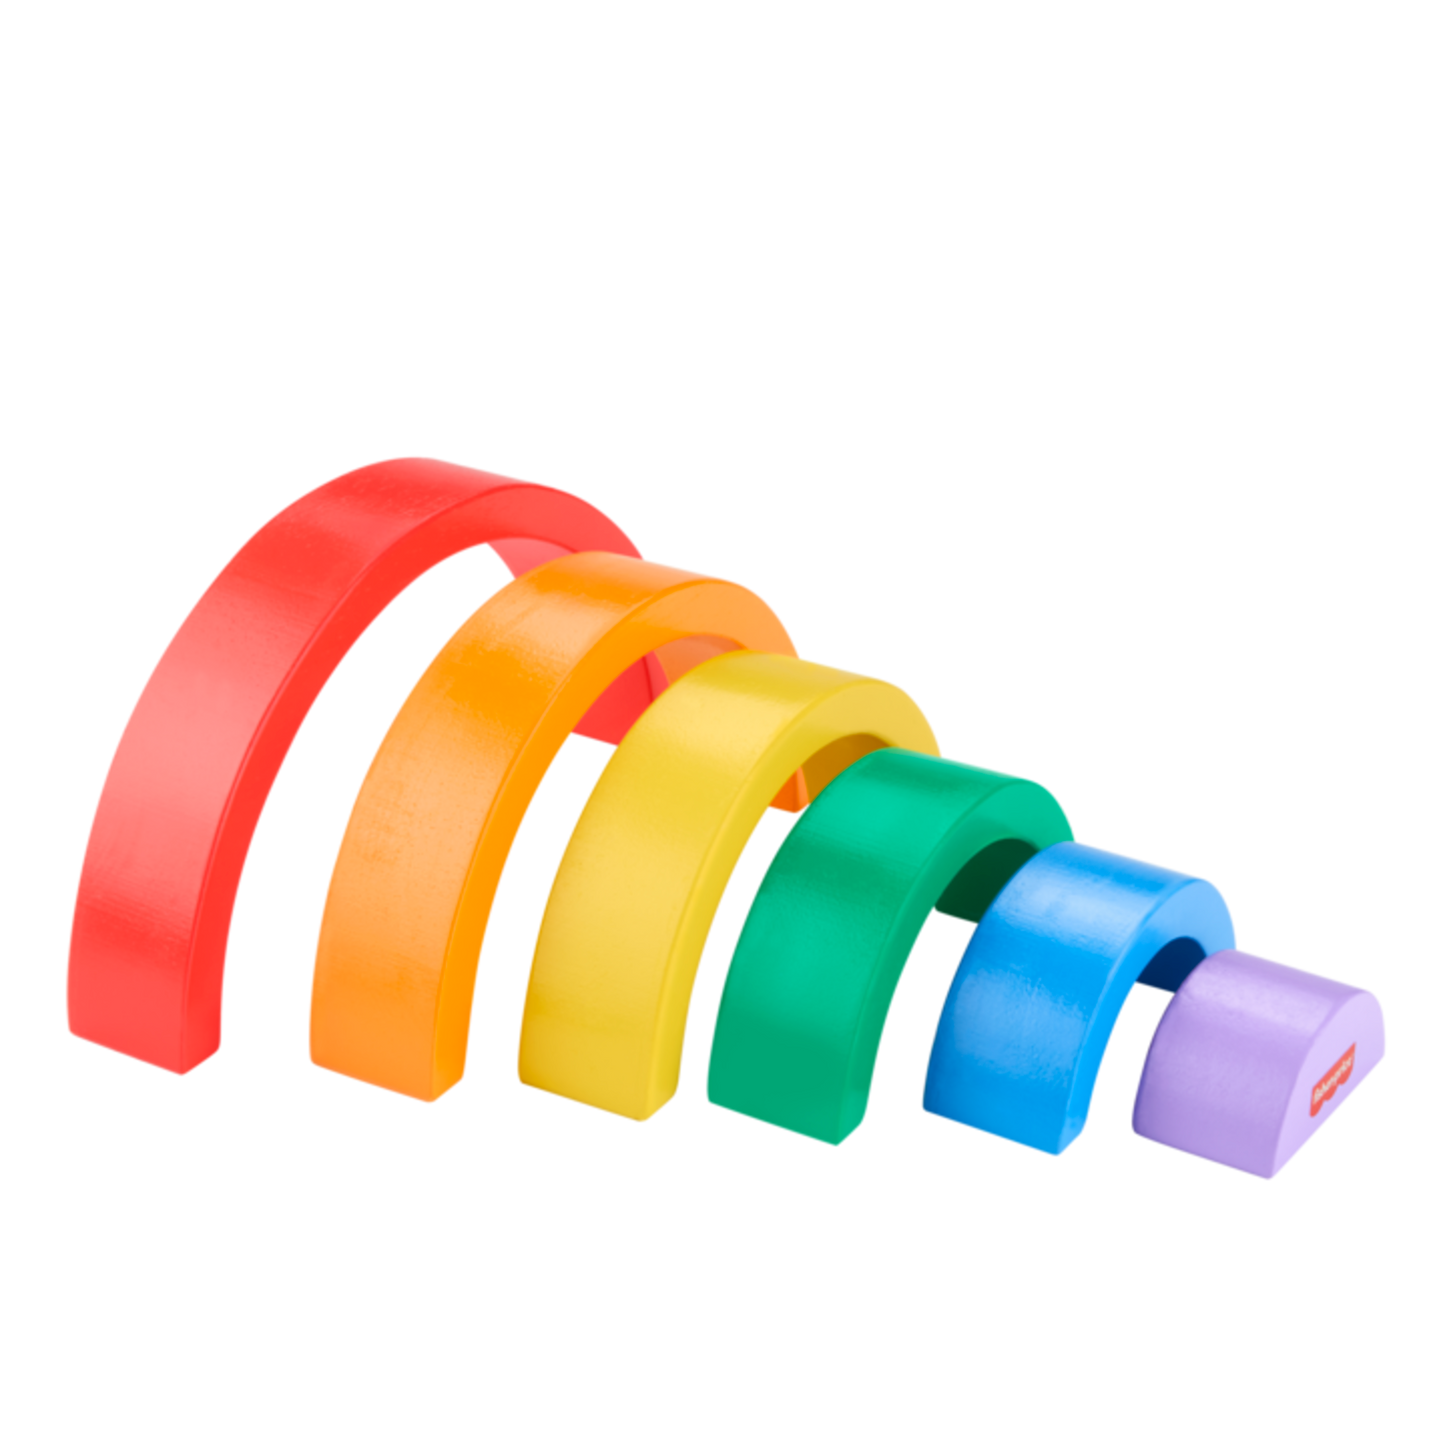 Fisher-Price Wooden Stacking Rainbow